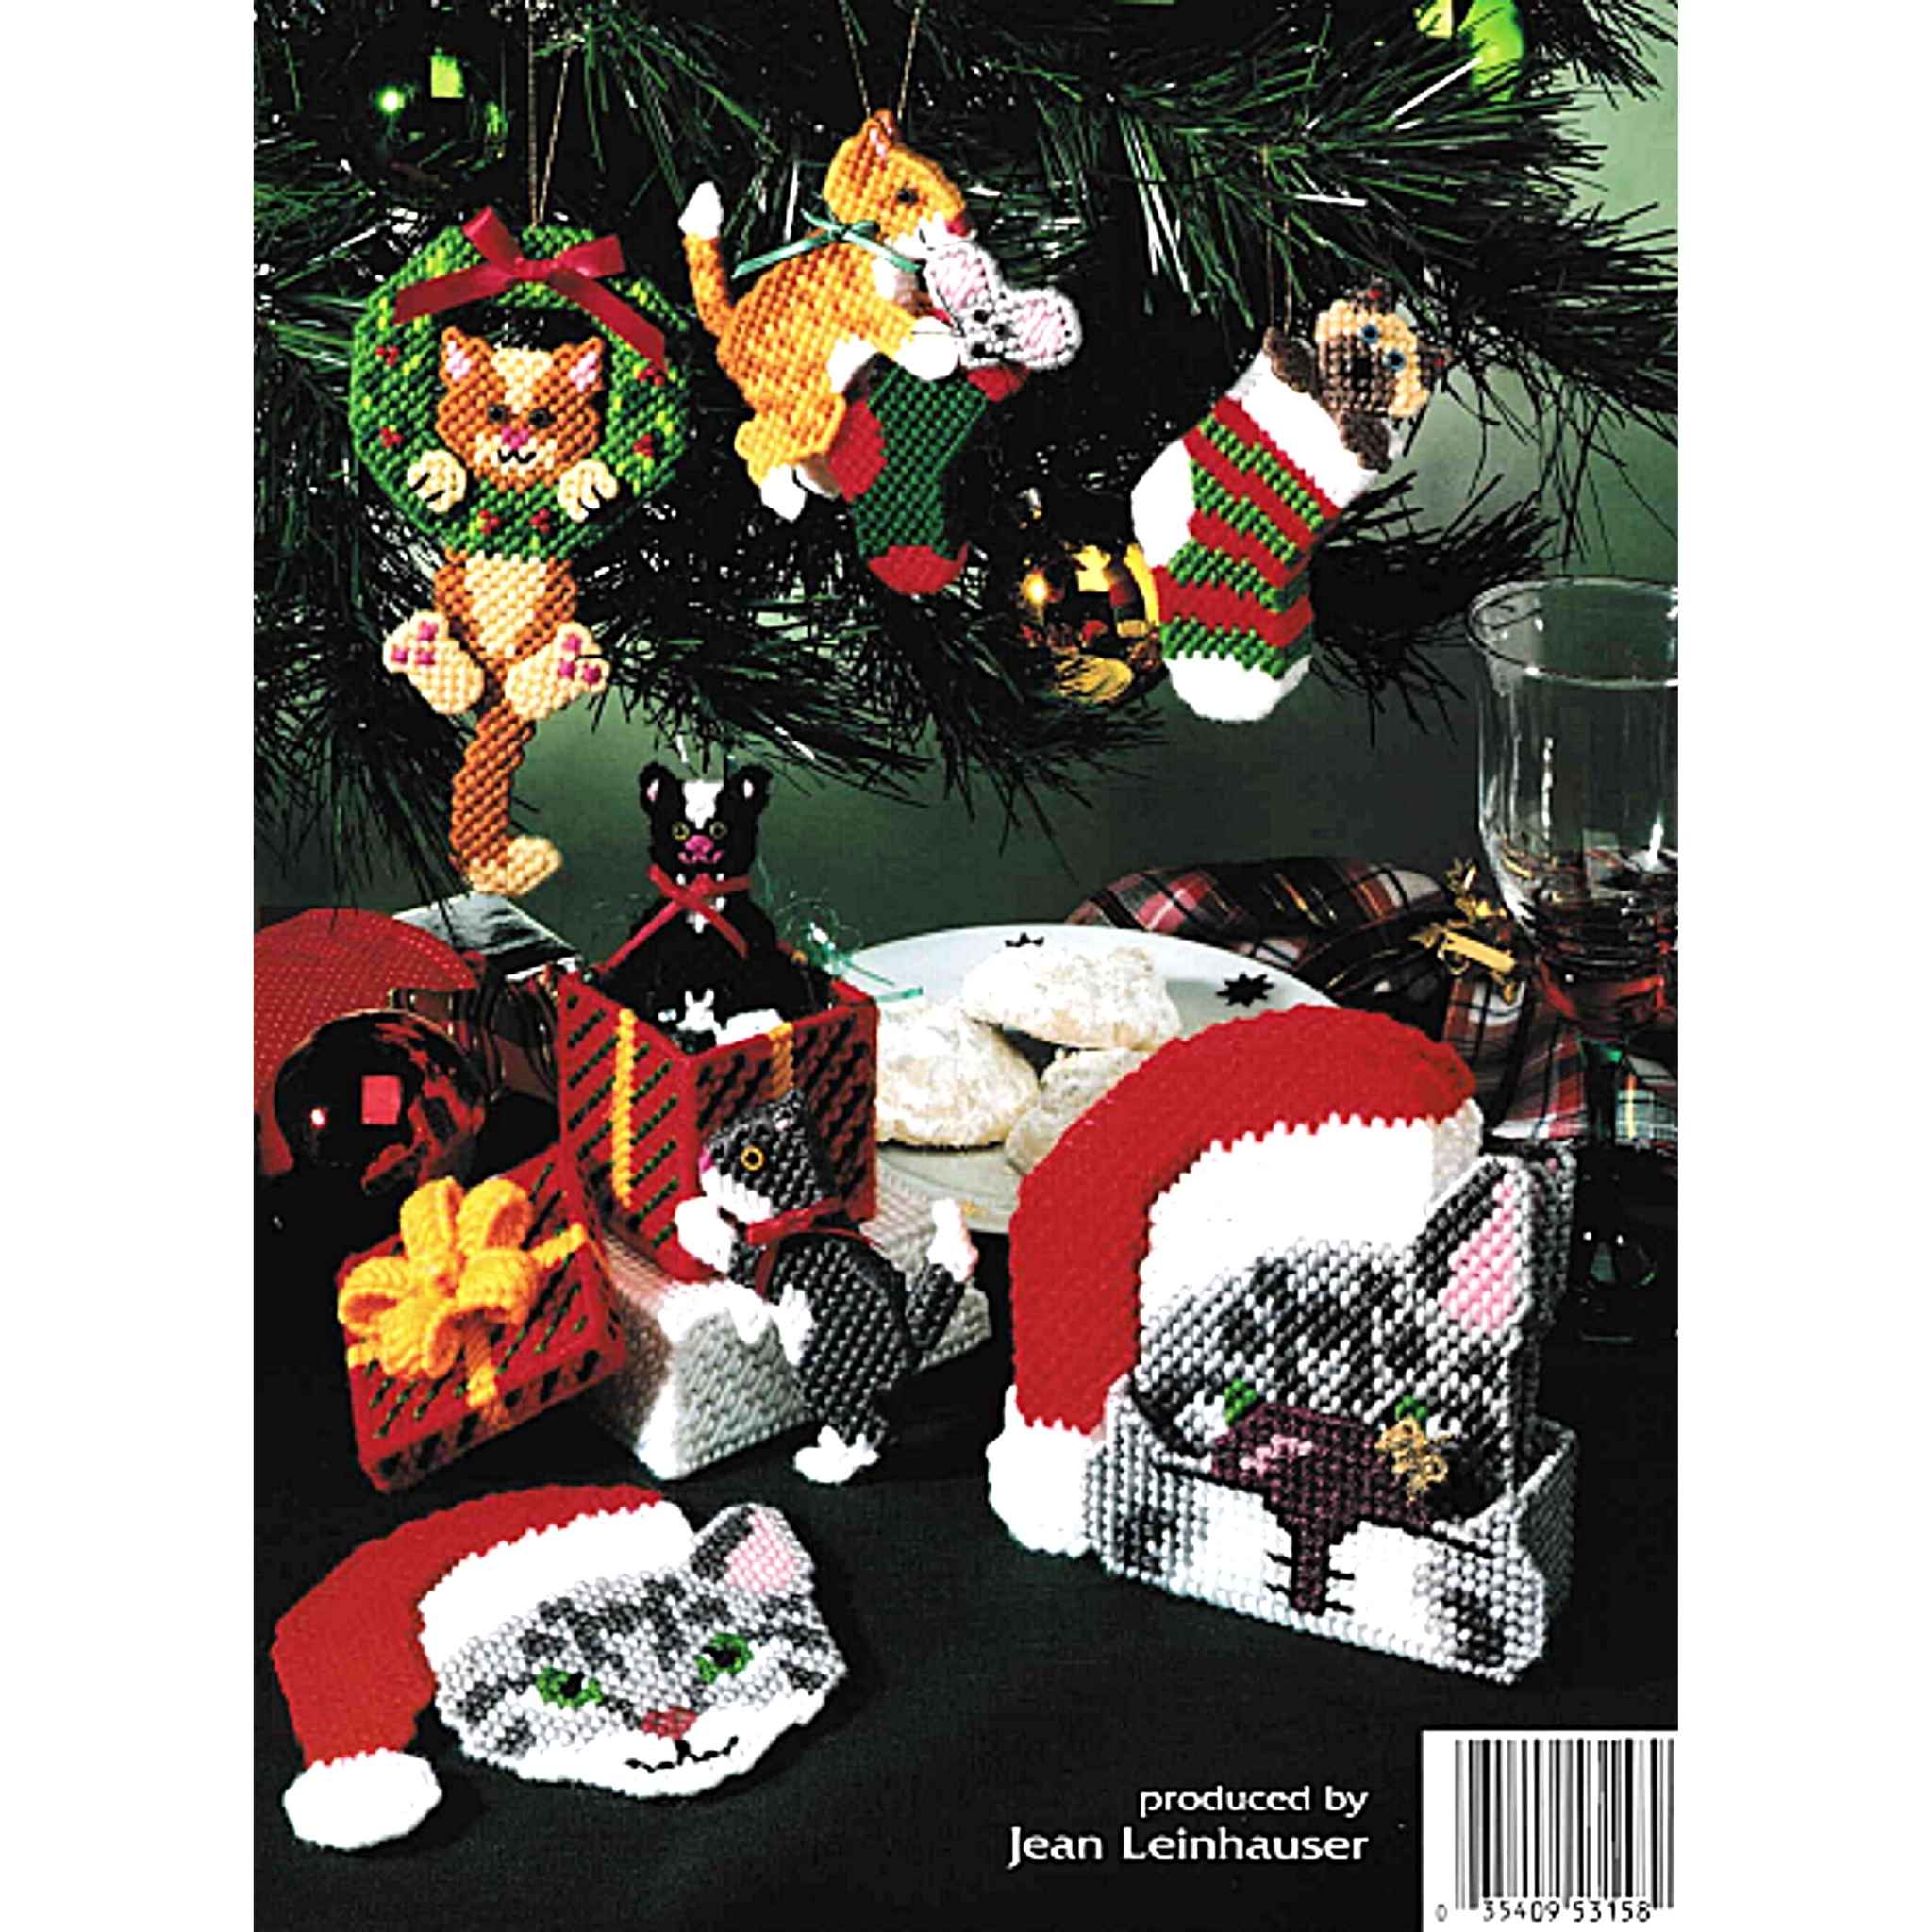 Christmas Cats Long Tissue Topper-Plastic Canvas Pattern or Kit